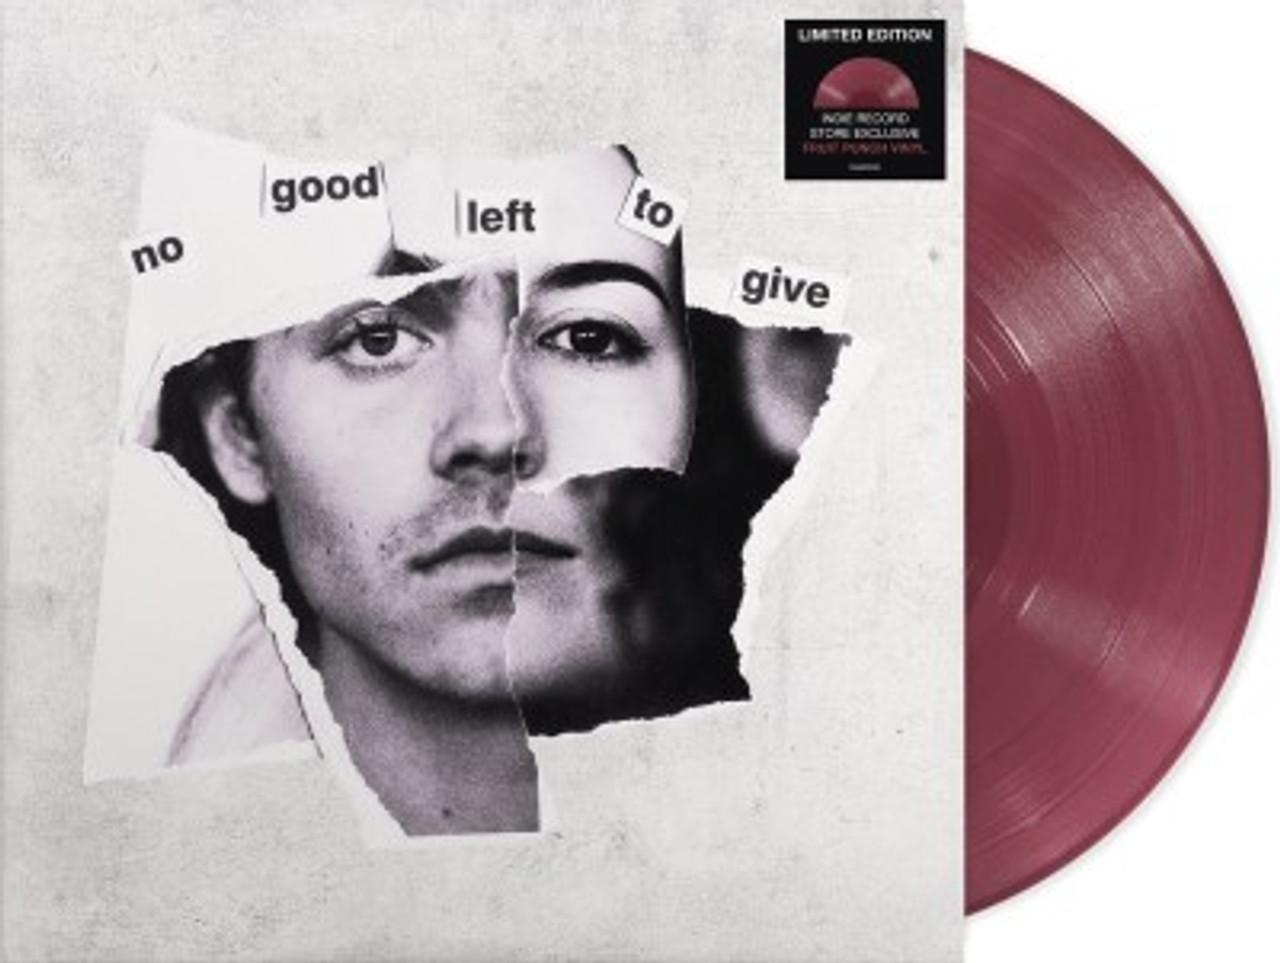 Movements | No Good Left To Give (Colored Vinyl, Limited Edition, Indie Exclusive) | Vinyl